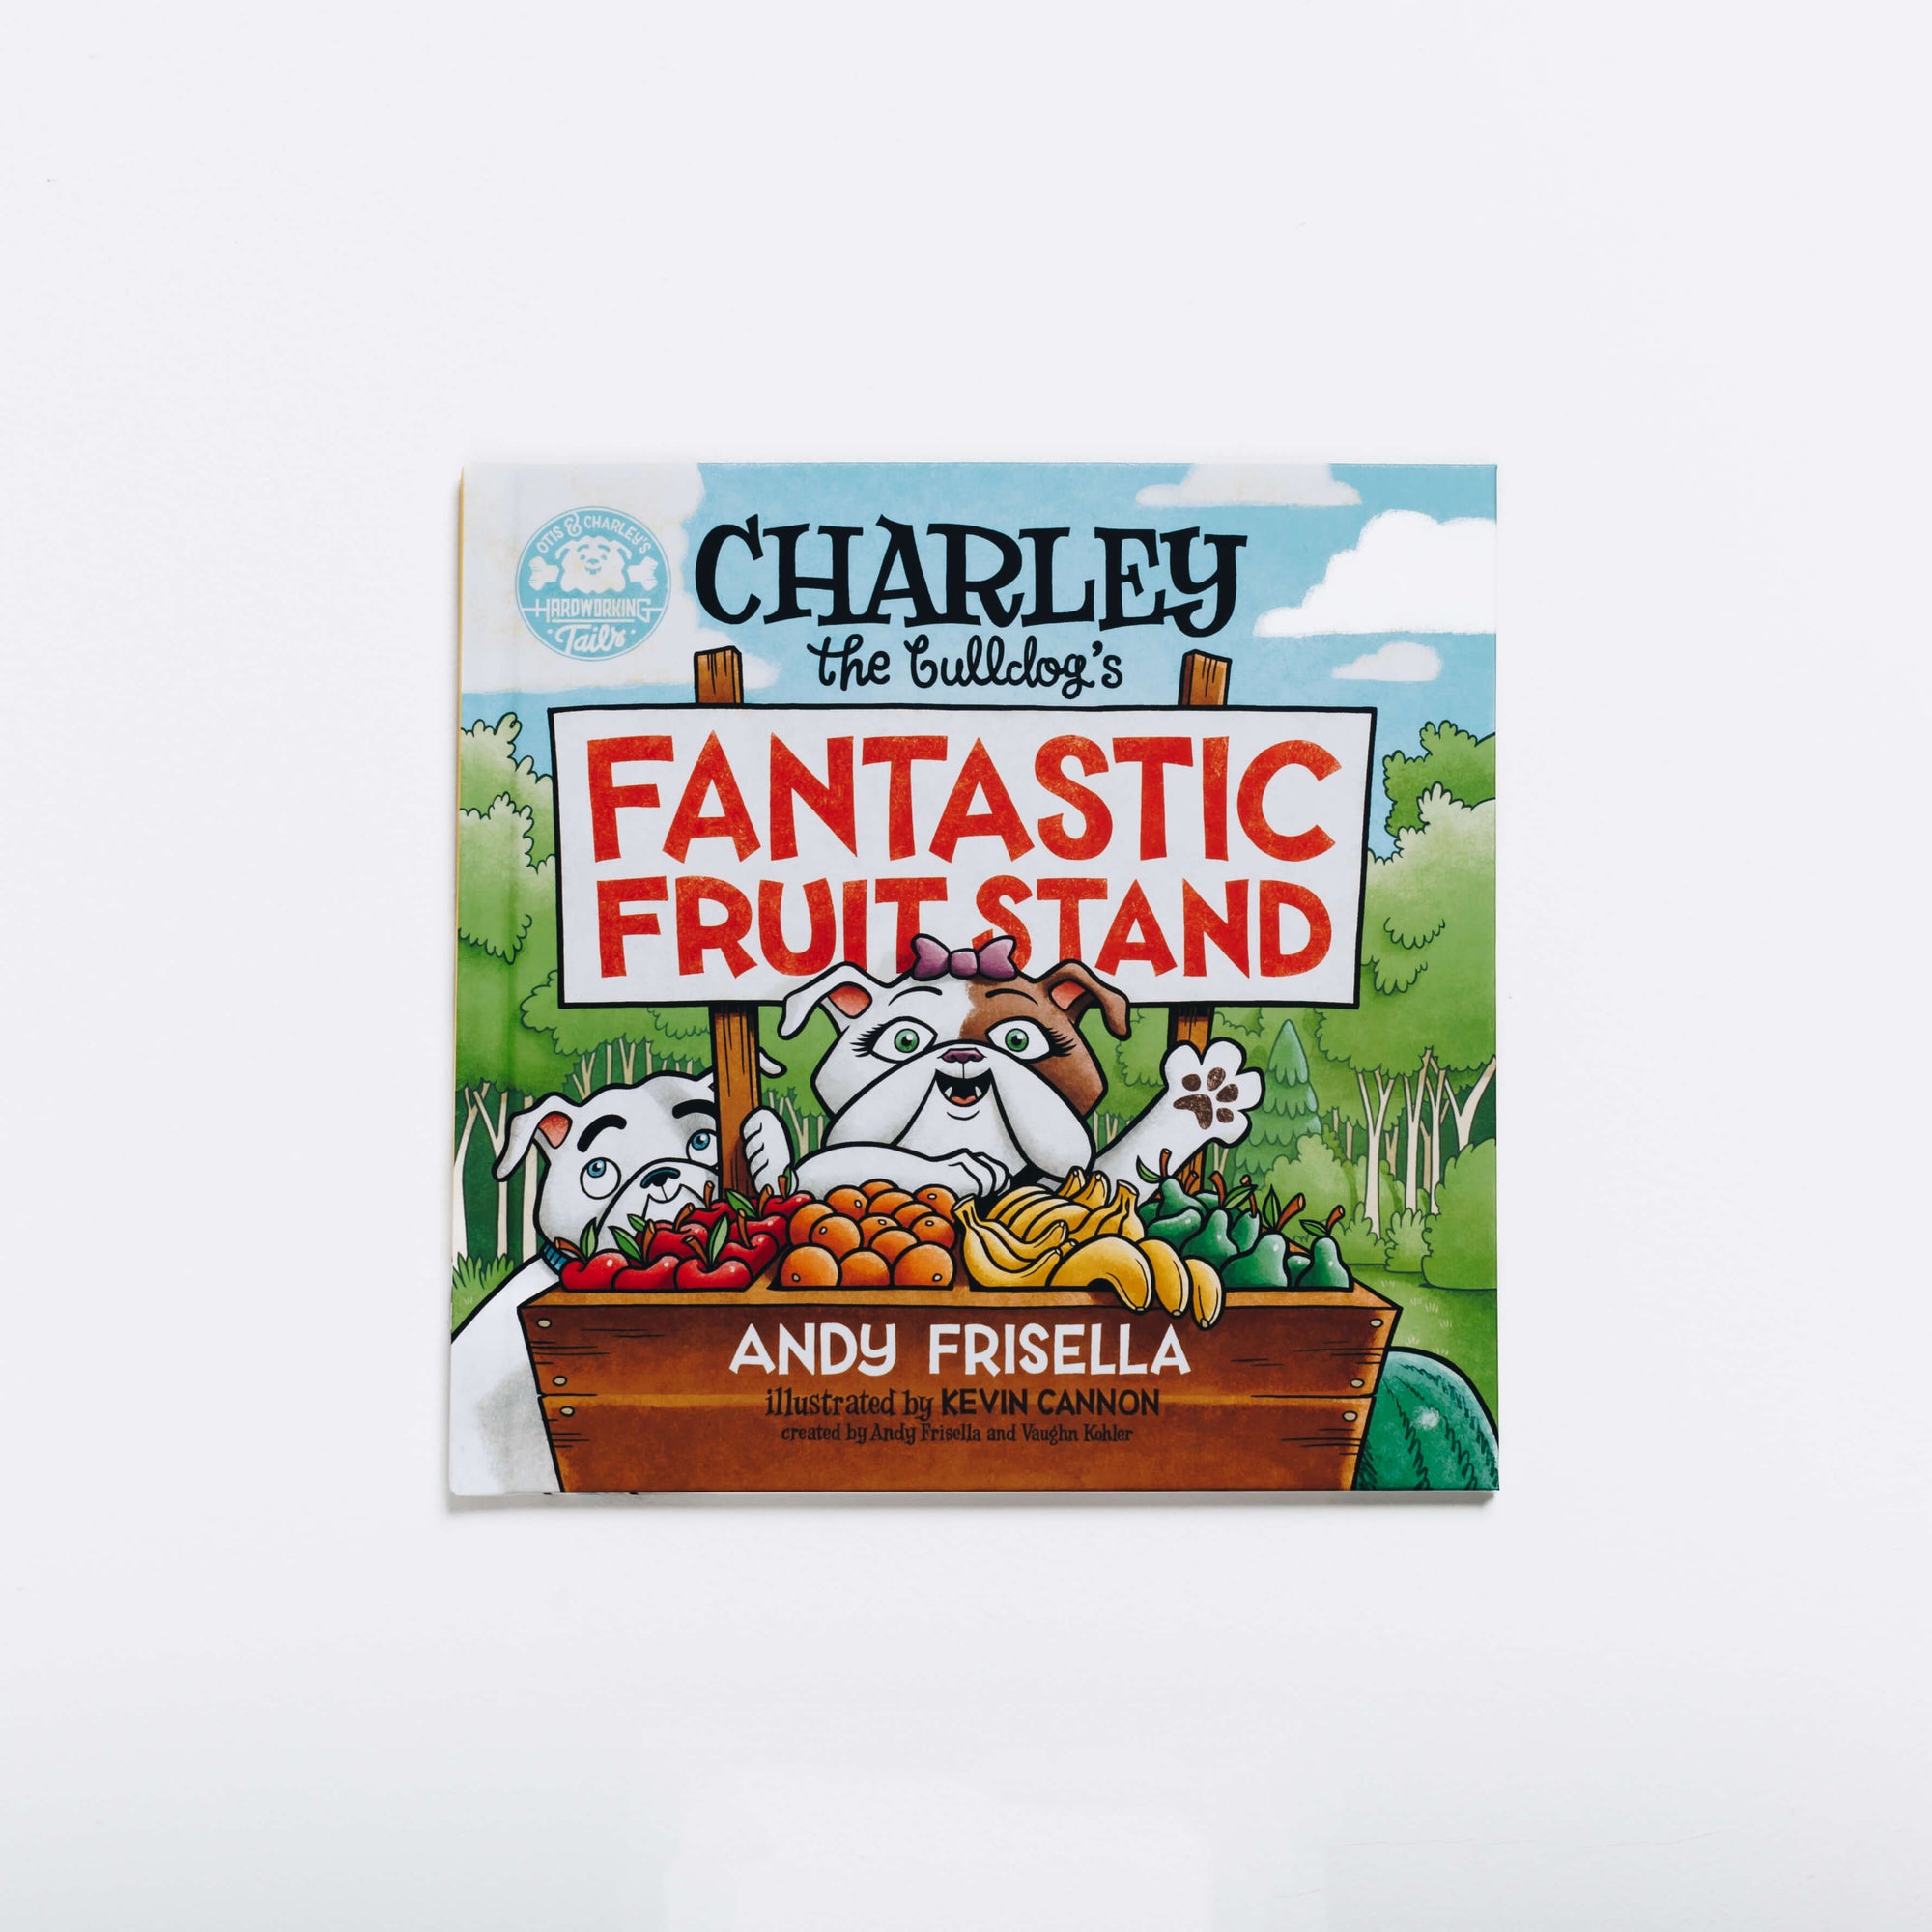 Charley the Bulldog's Fantastic Fruit Stand